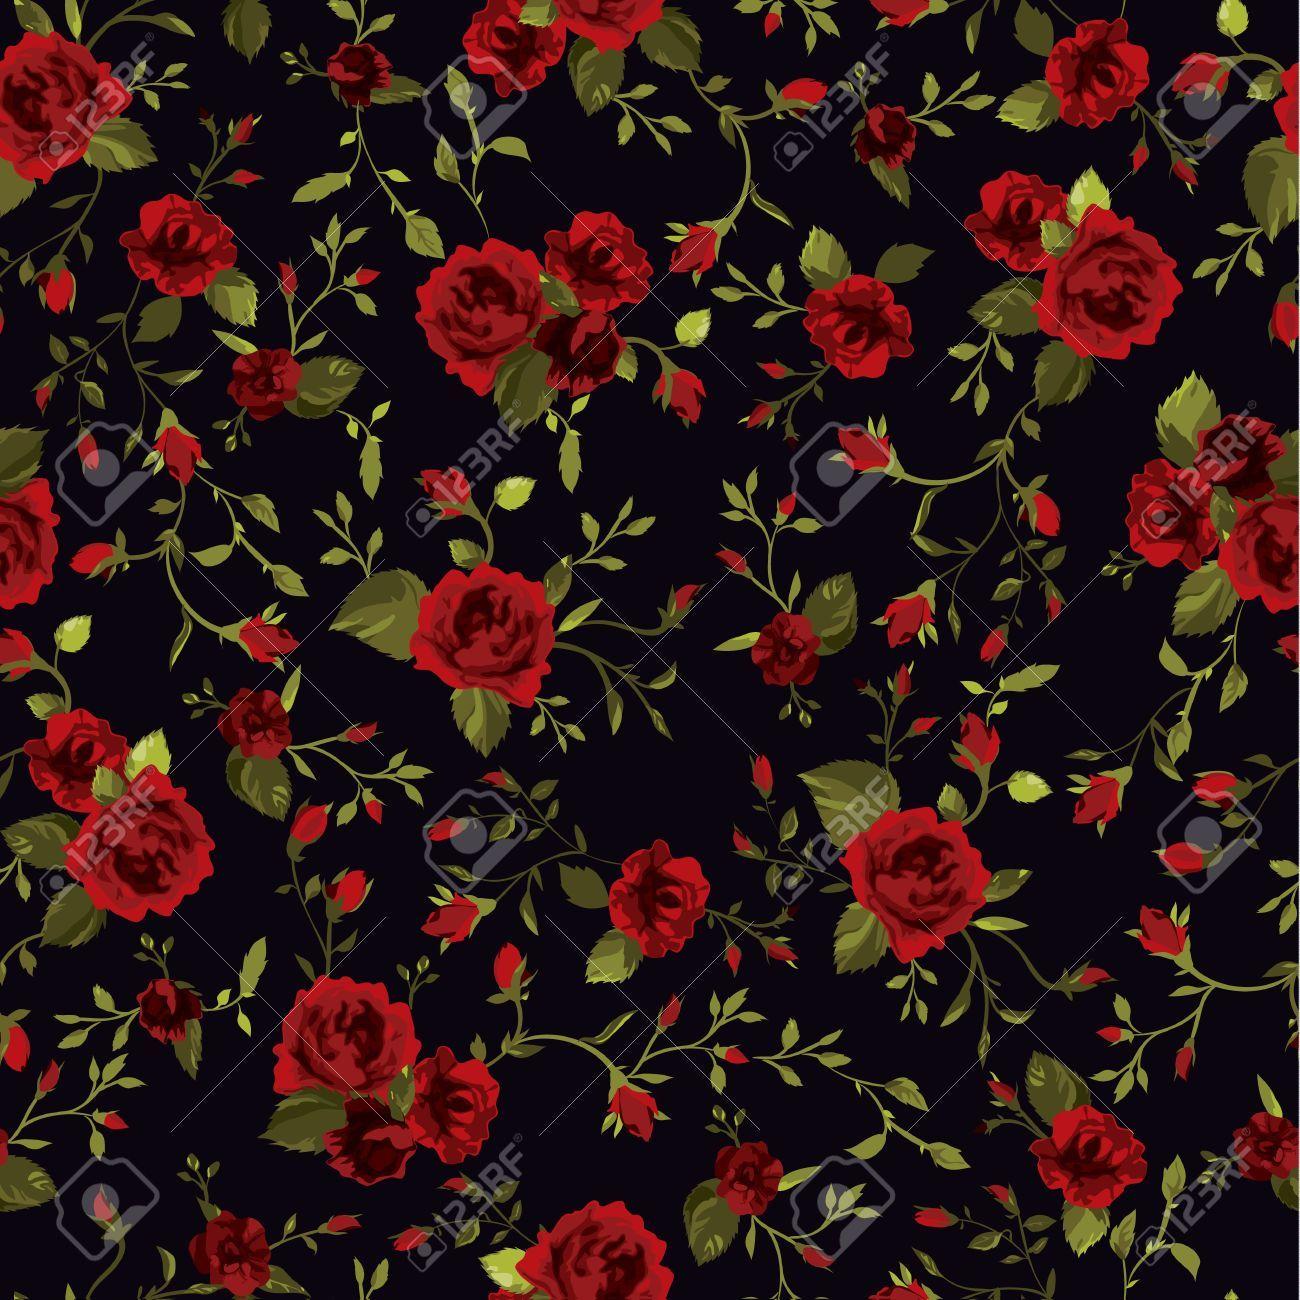 RED ROSES BACKGROUND